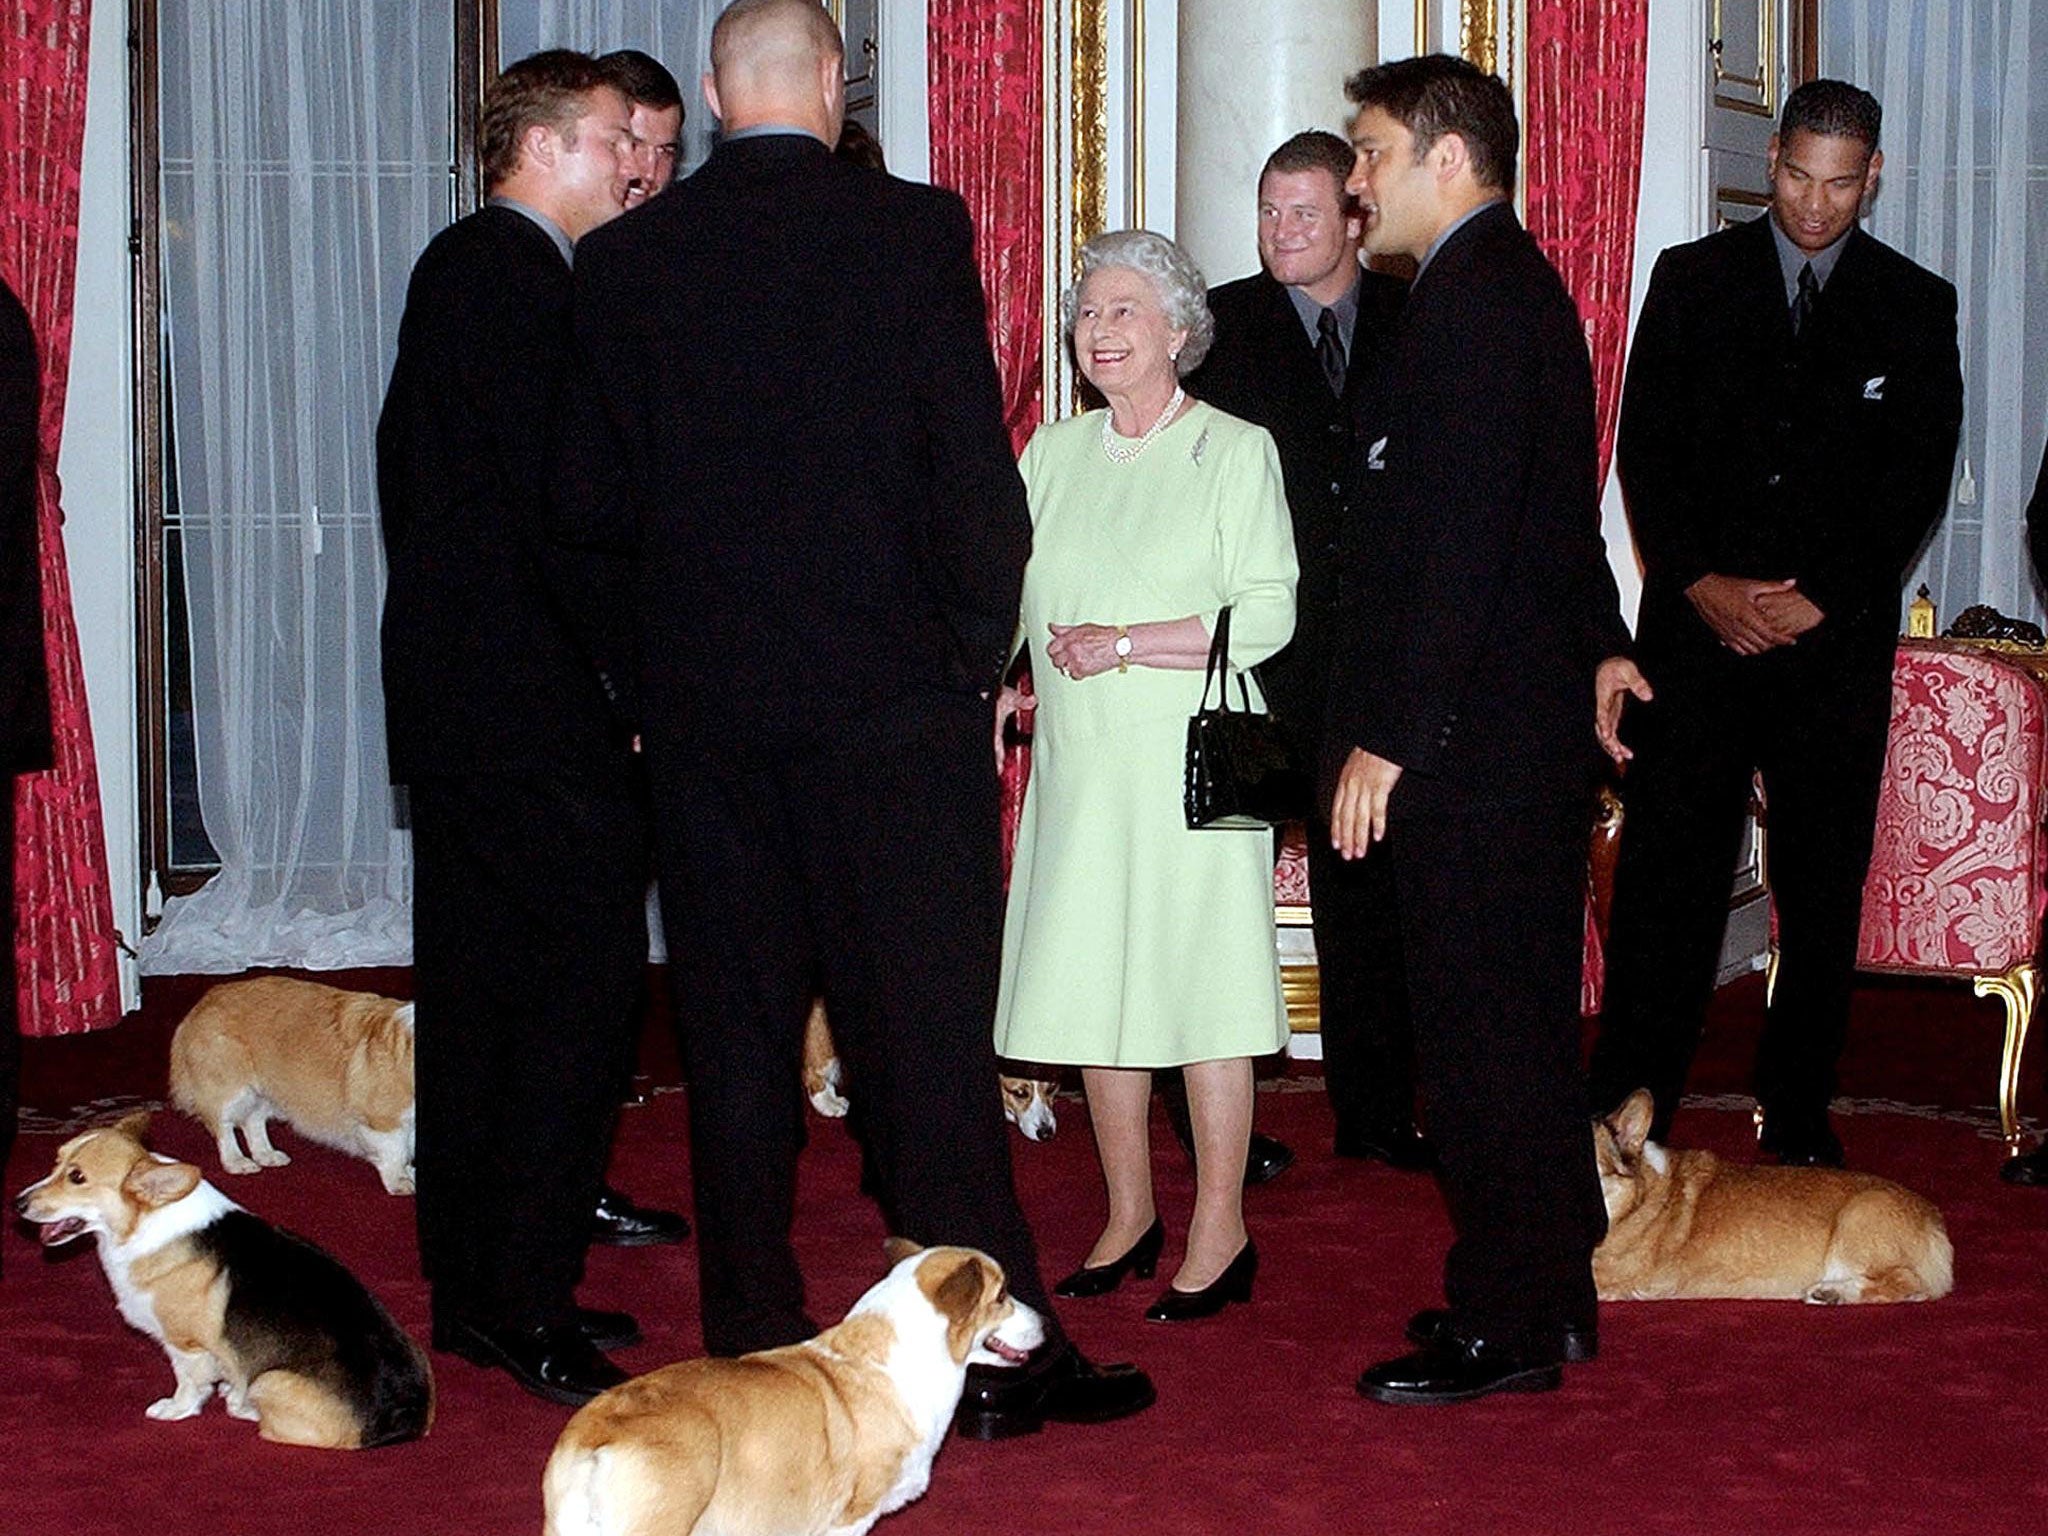 The Queen with her corgis in 2002